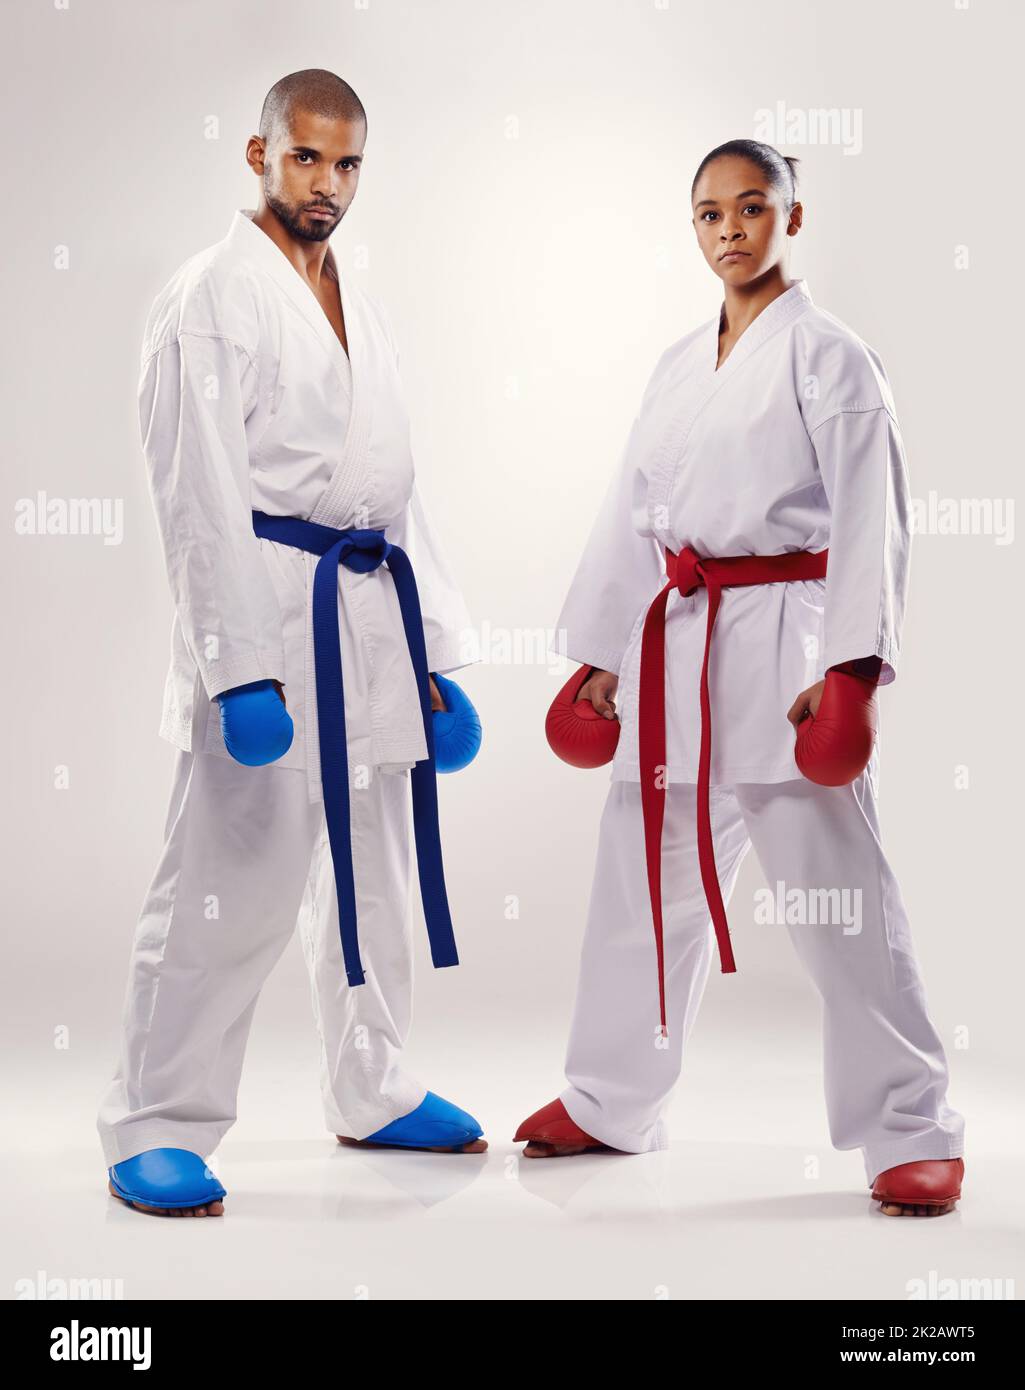 Respect your opponent. Two people doing karate. Stock Photo